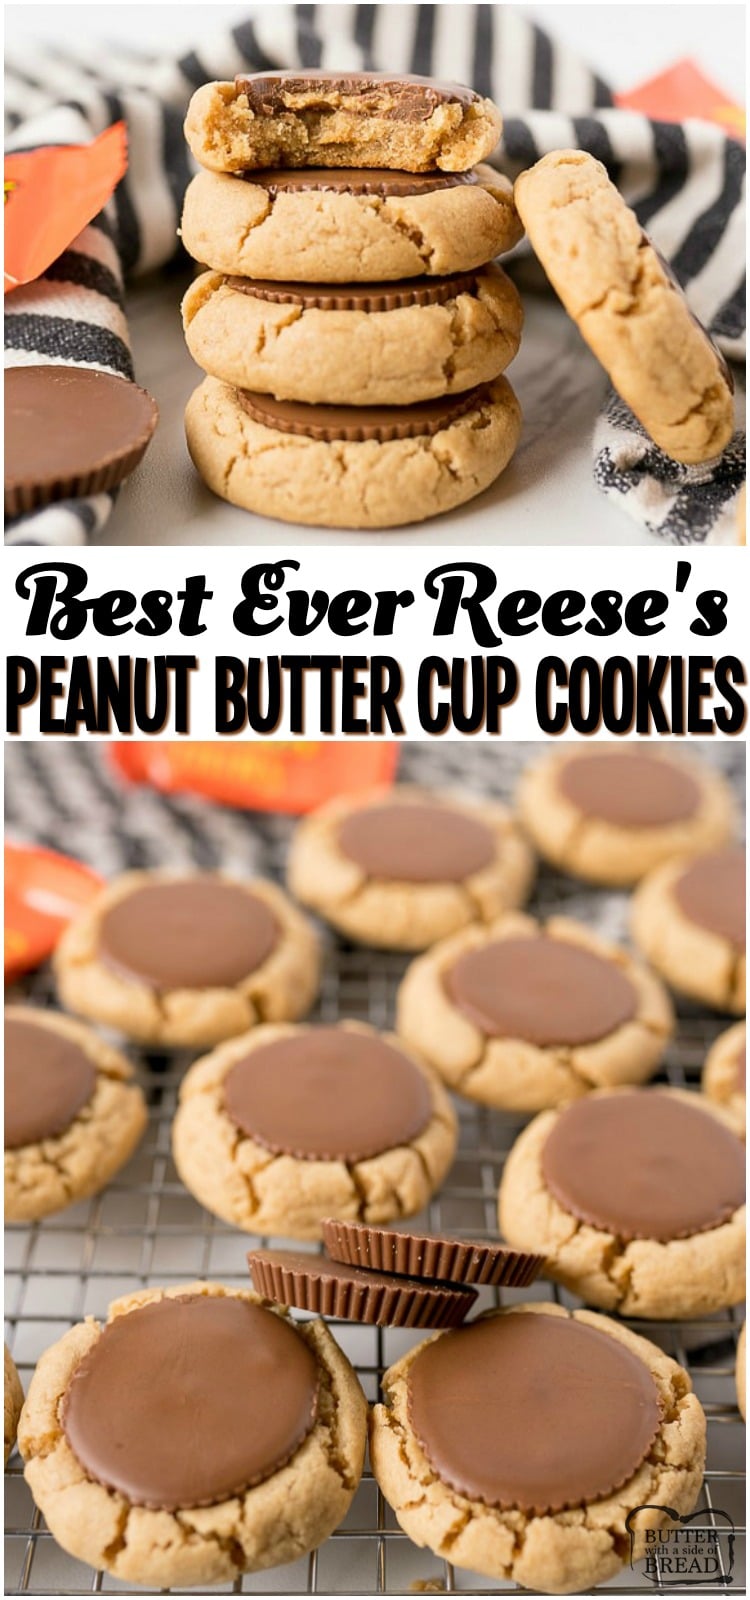 Reese's Peanut Butter Cup Cookies are a mega soft and chewy peanut butter cookie, baked and then topped with a Peanut Butter Cup straight out of the oven! Perfect peanut butter cookie  for all Peanut Butter and Chocolate lovers! #reeses #peanutbutter #cookies #peatnutbuttercup #dessert #chocolate #dessert #baking #recipe from BUTTER WITH A SIDE OF BREAD